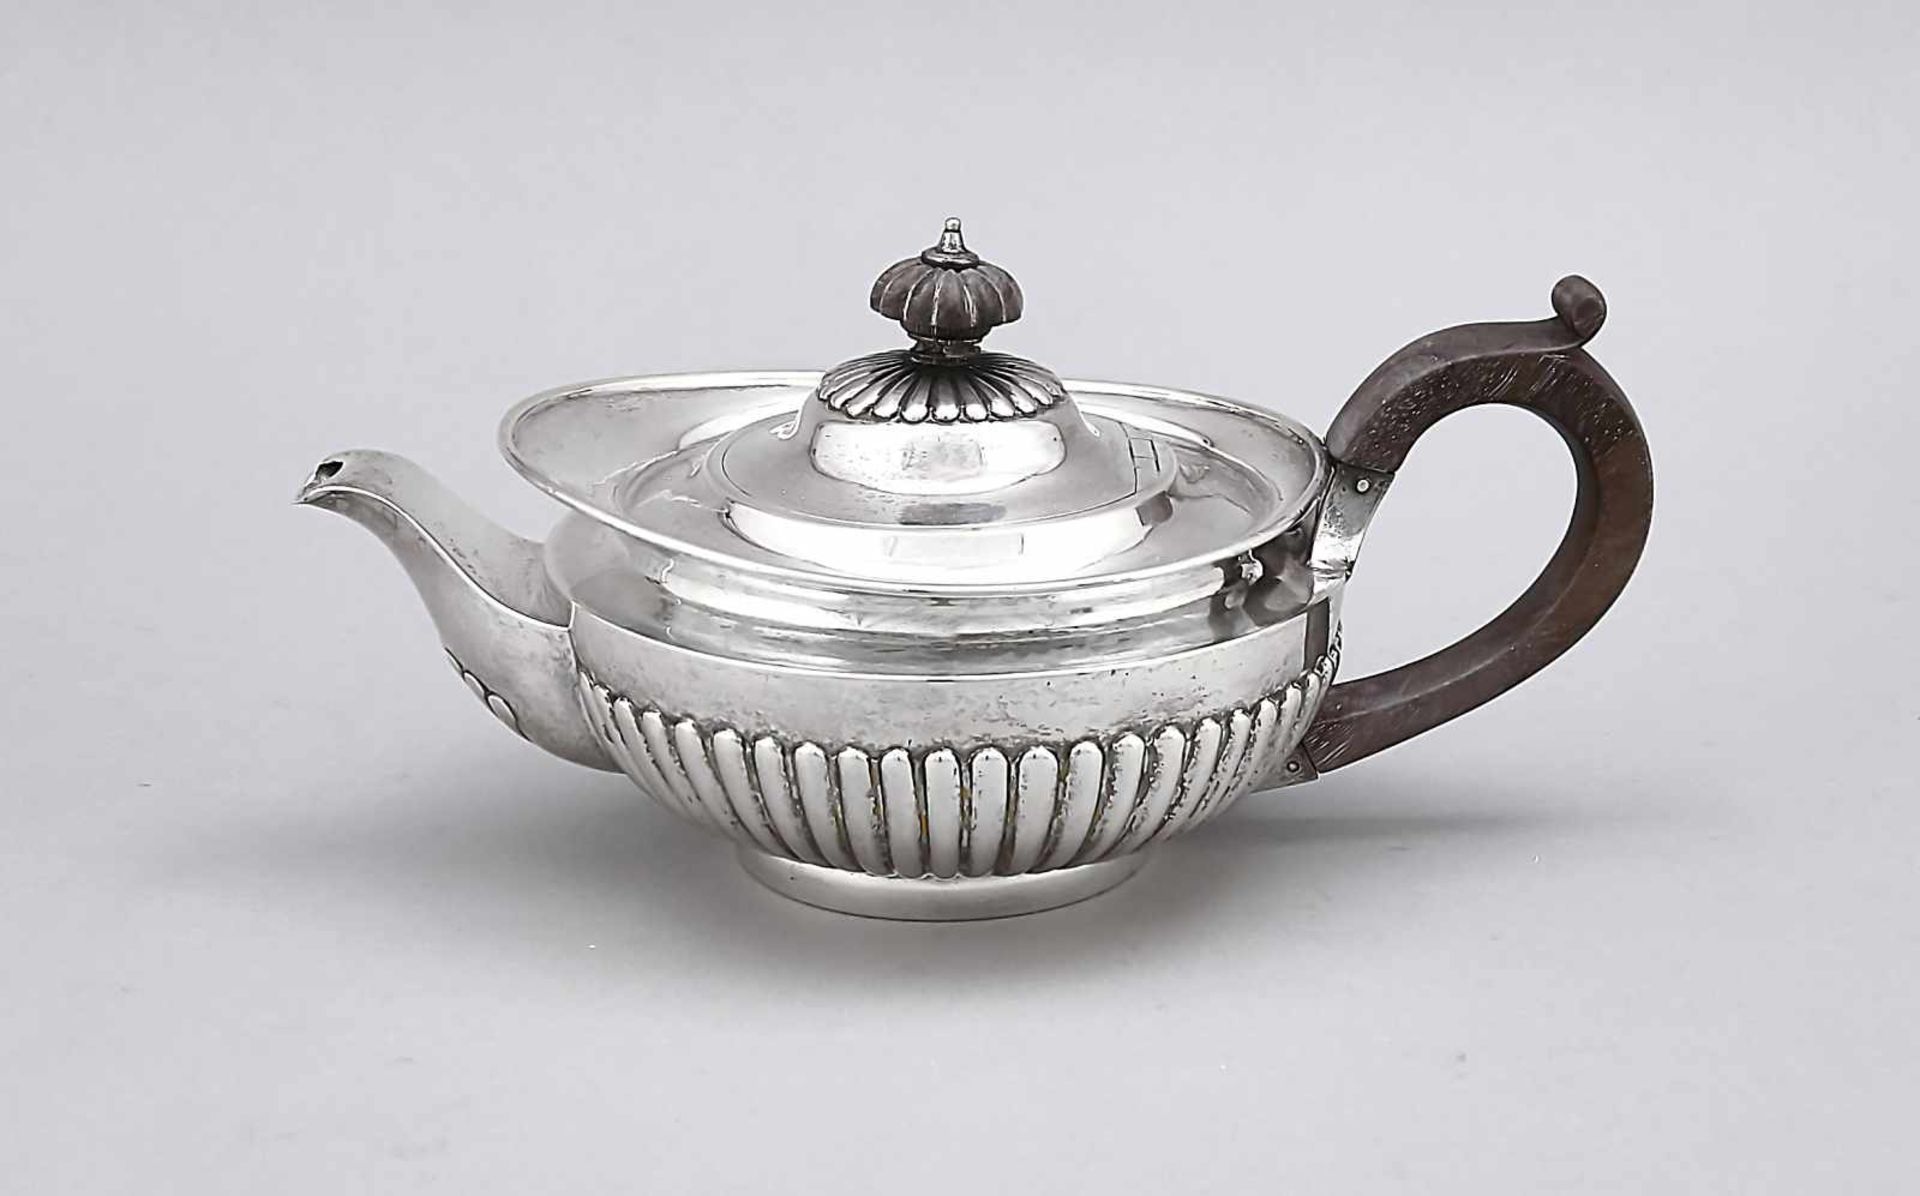 Teapot, England, 1877, hallmarked Dobson & Sons, London, Sterling silver 925/000, round